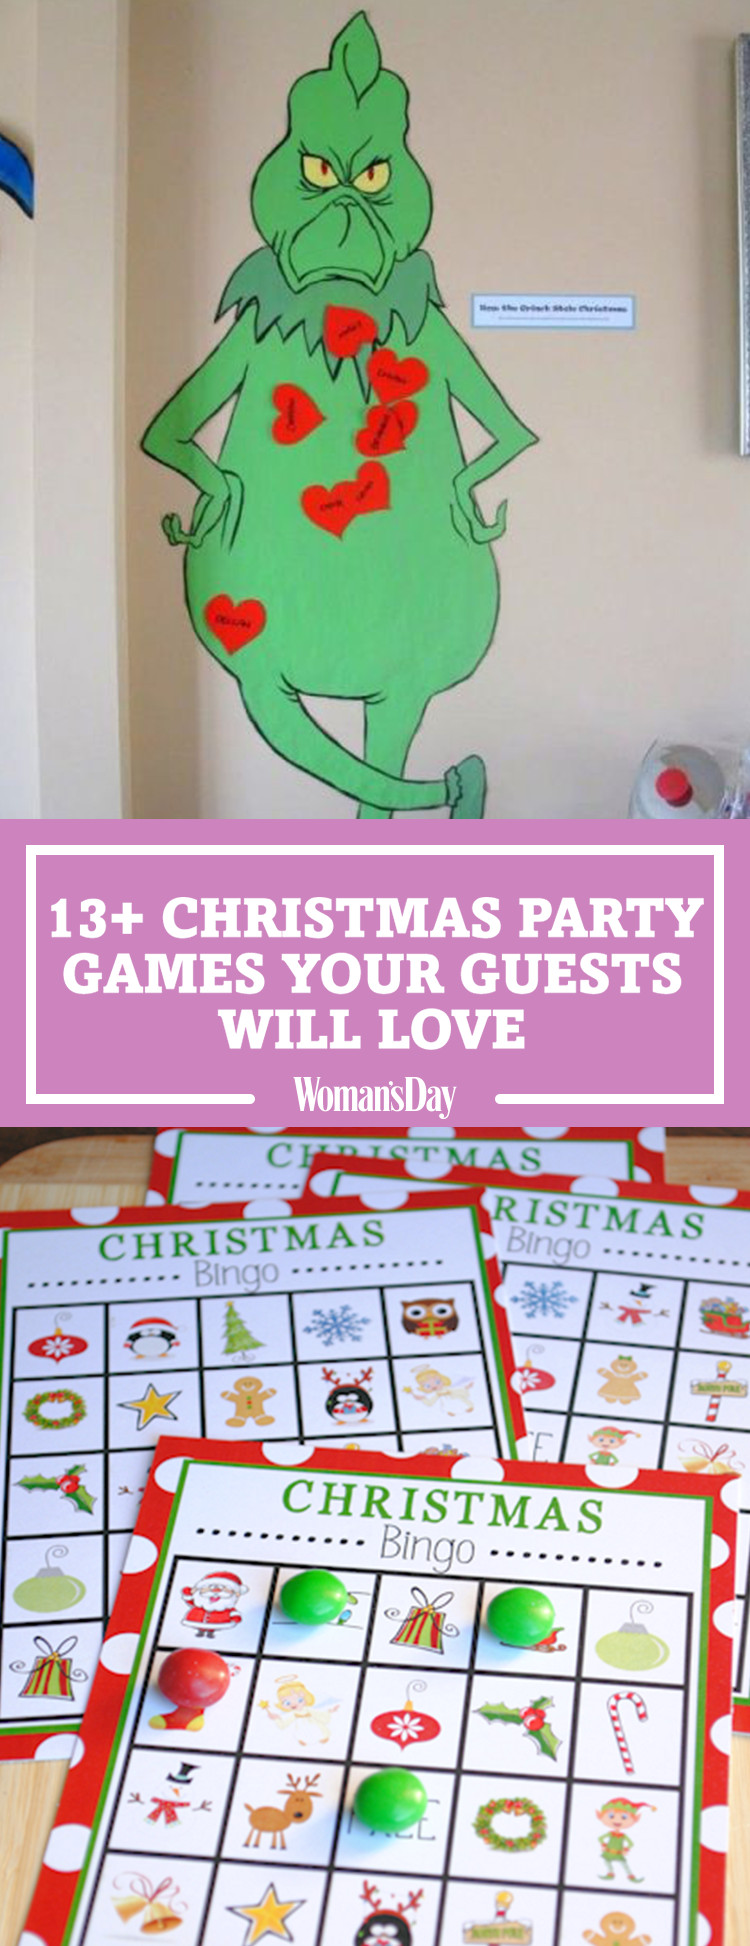 Enjoyable Office Christmas Party Games Ideas
 17 Fun Christmas Party Games for Kids DIY Holiday Party